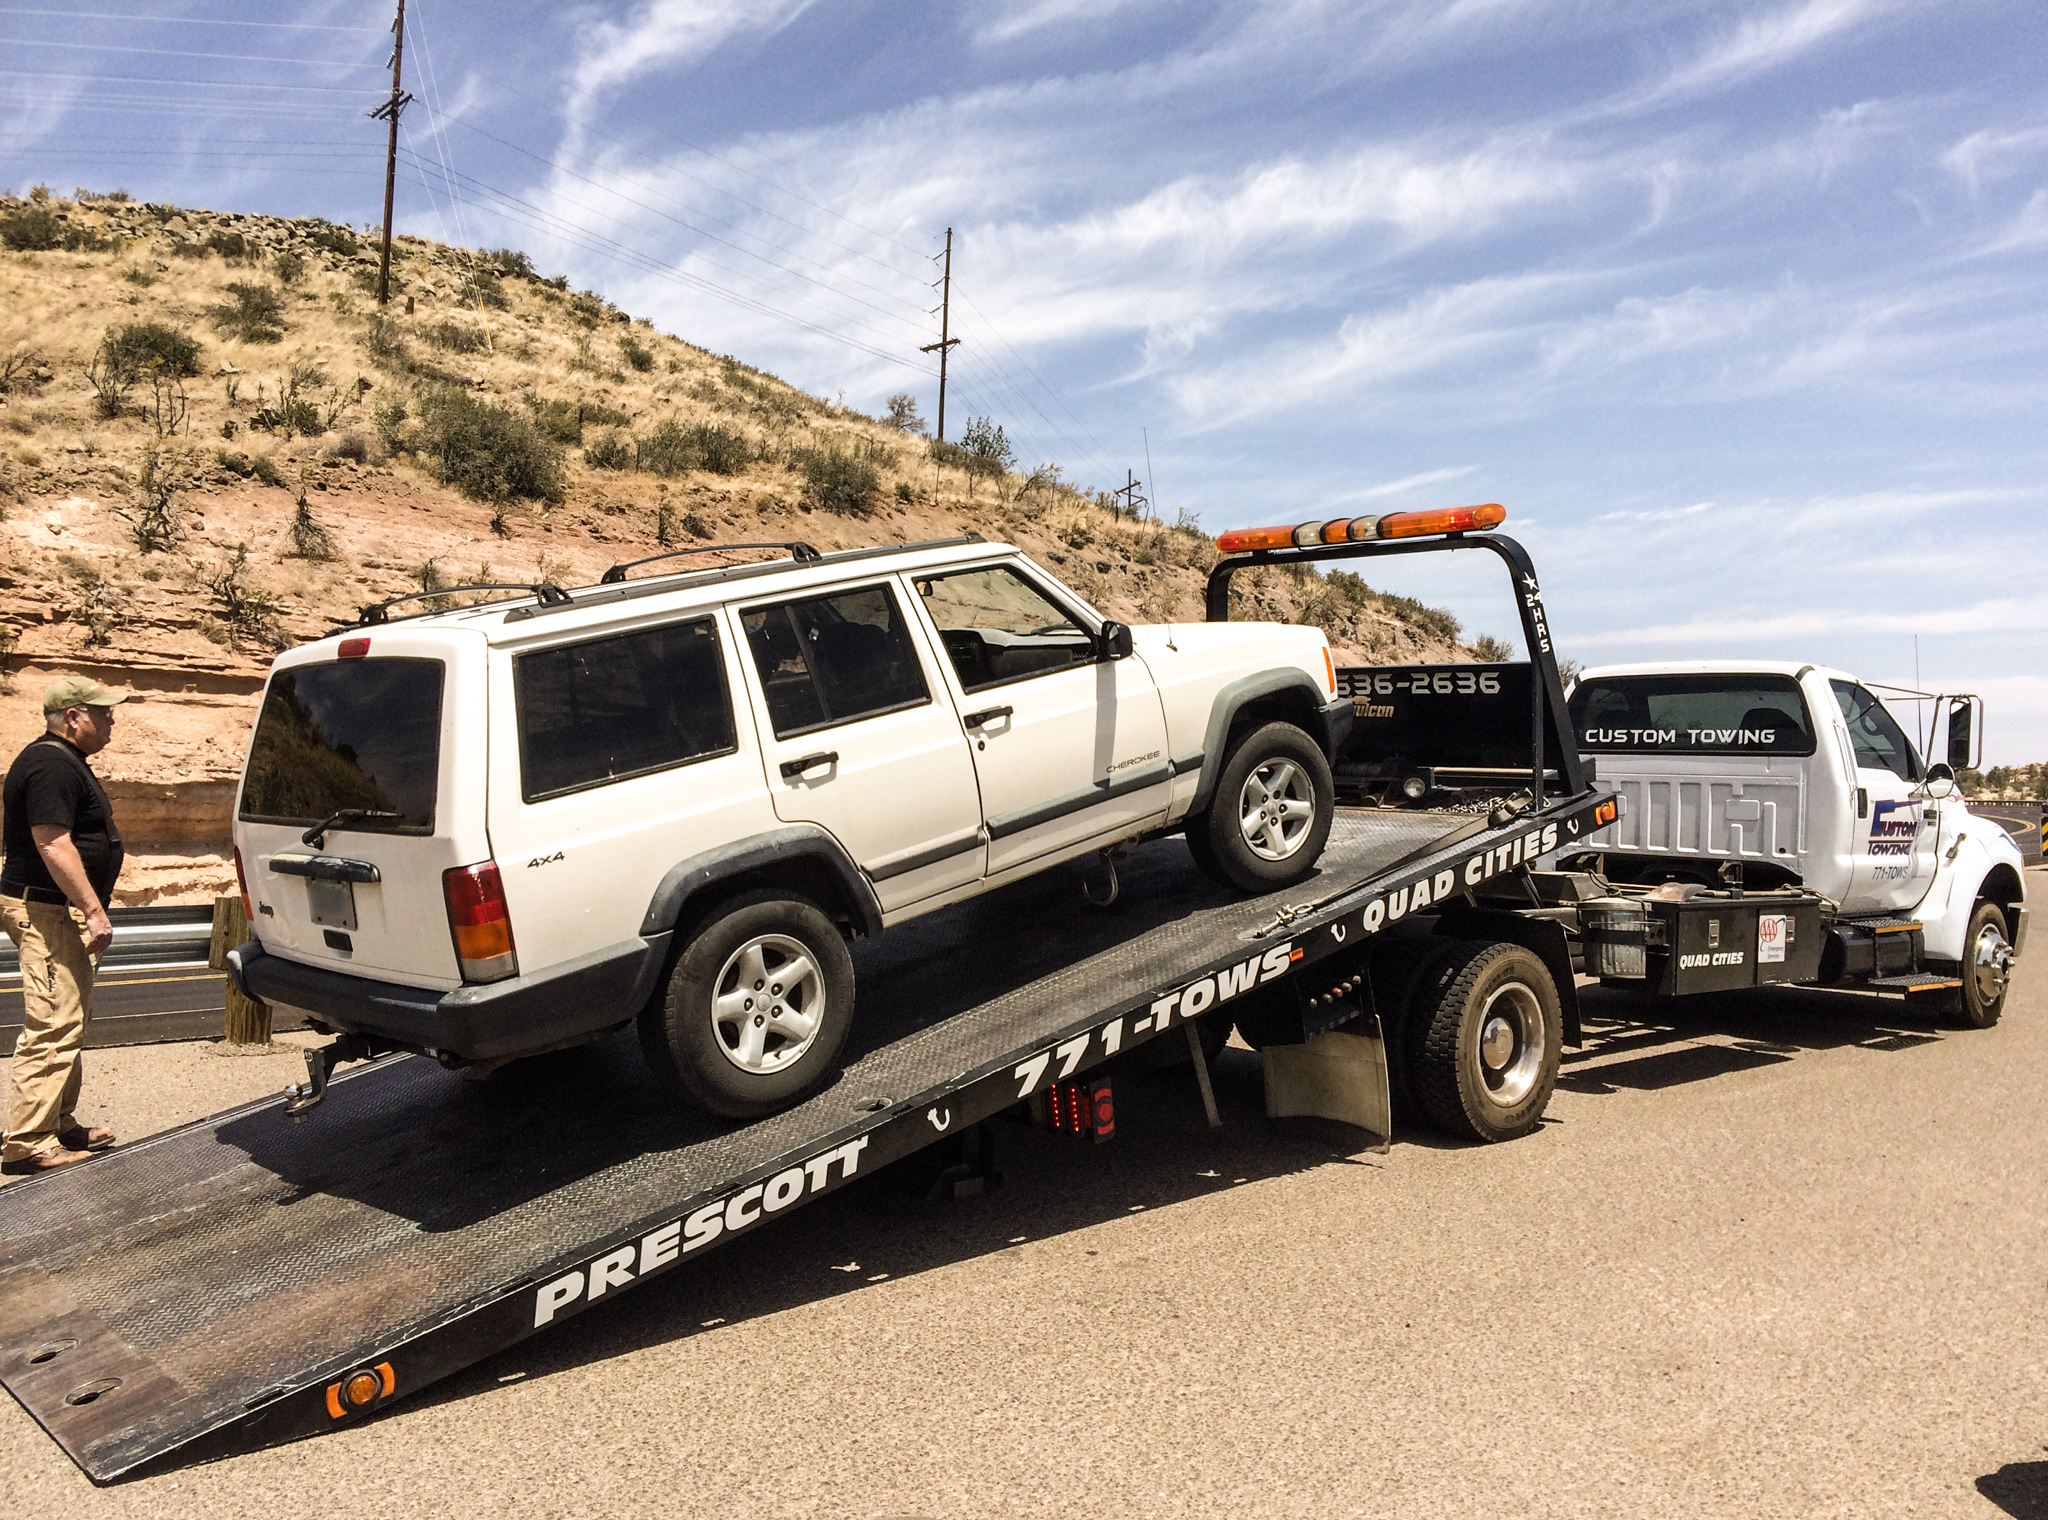 A car being towed away by a tow truck